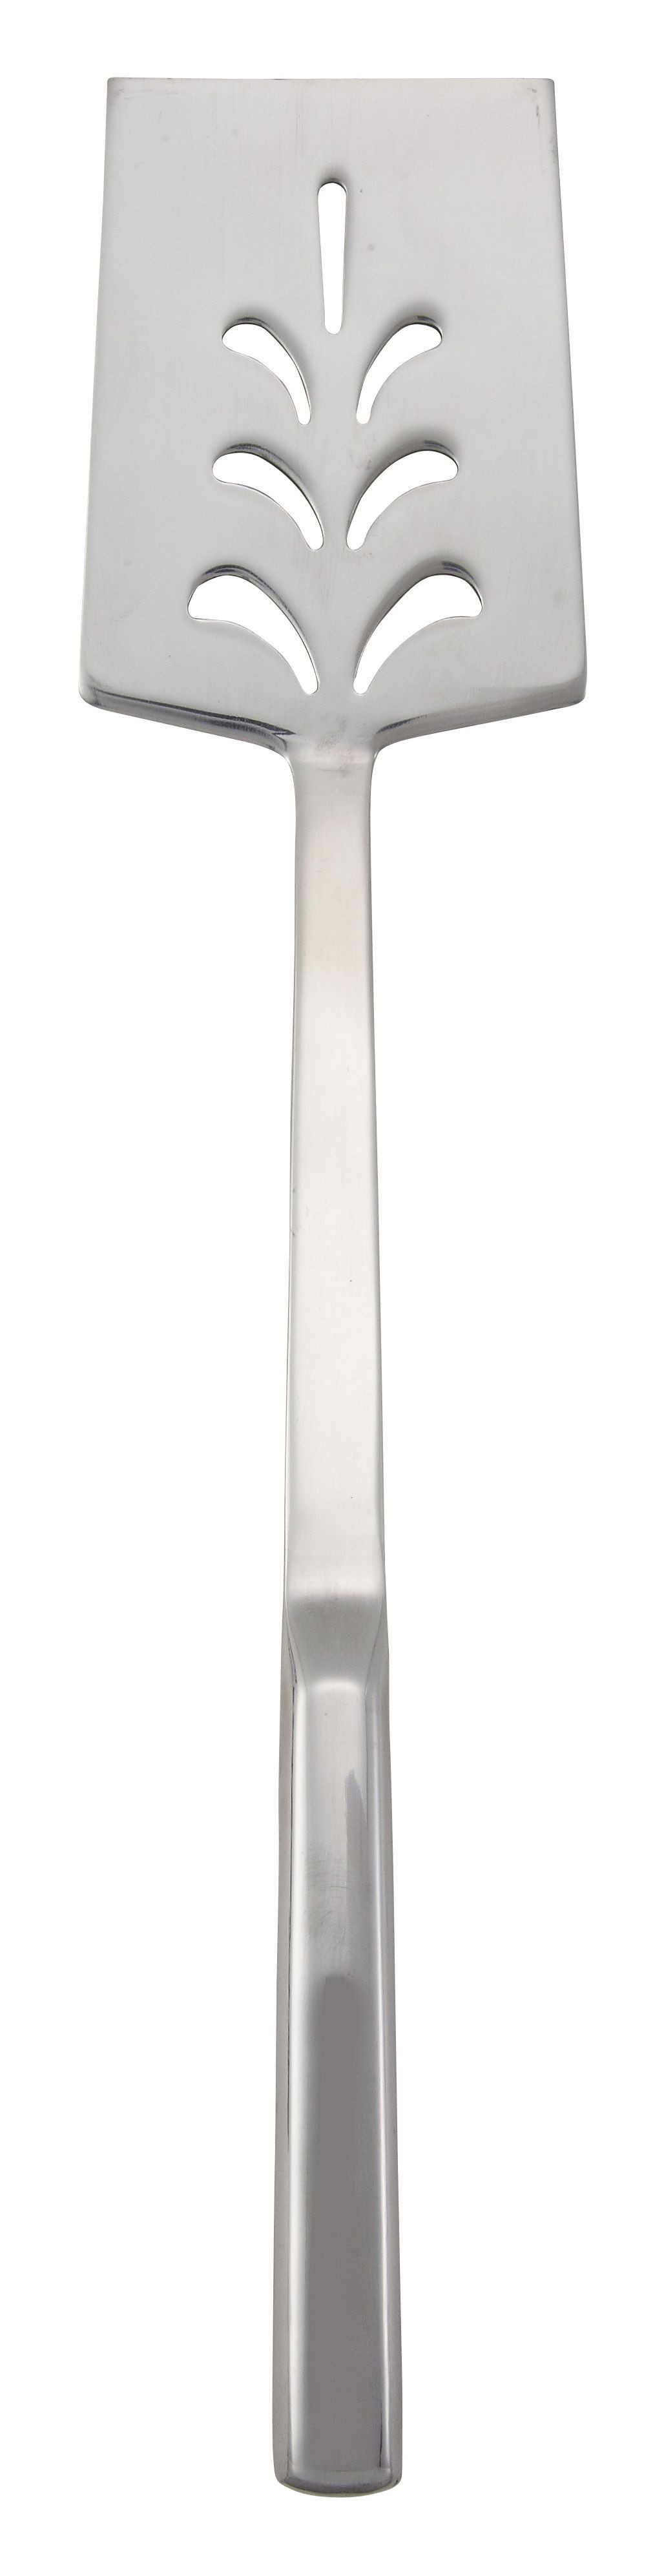 Winco STN-3 Stainless Steel Slotted Pancake Turner - LionsDeal